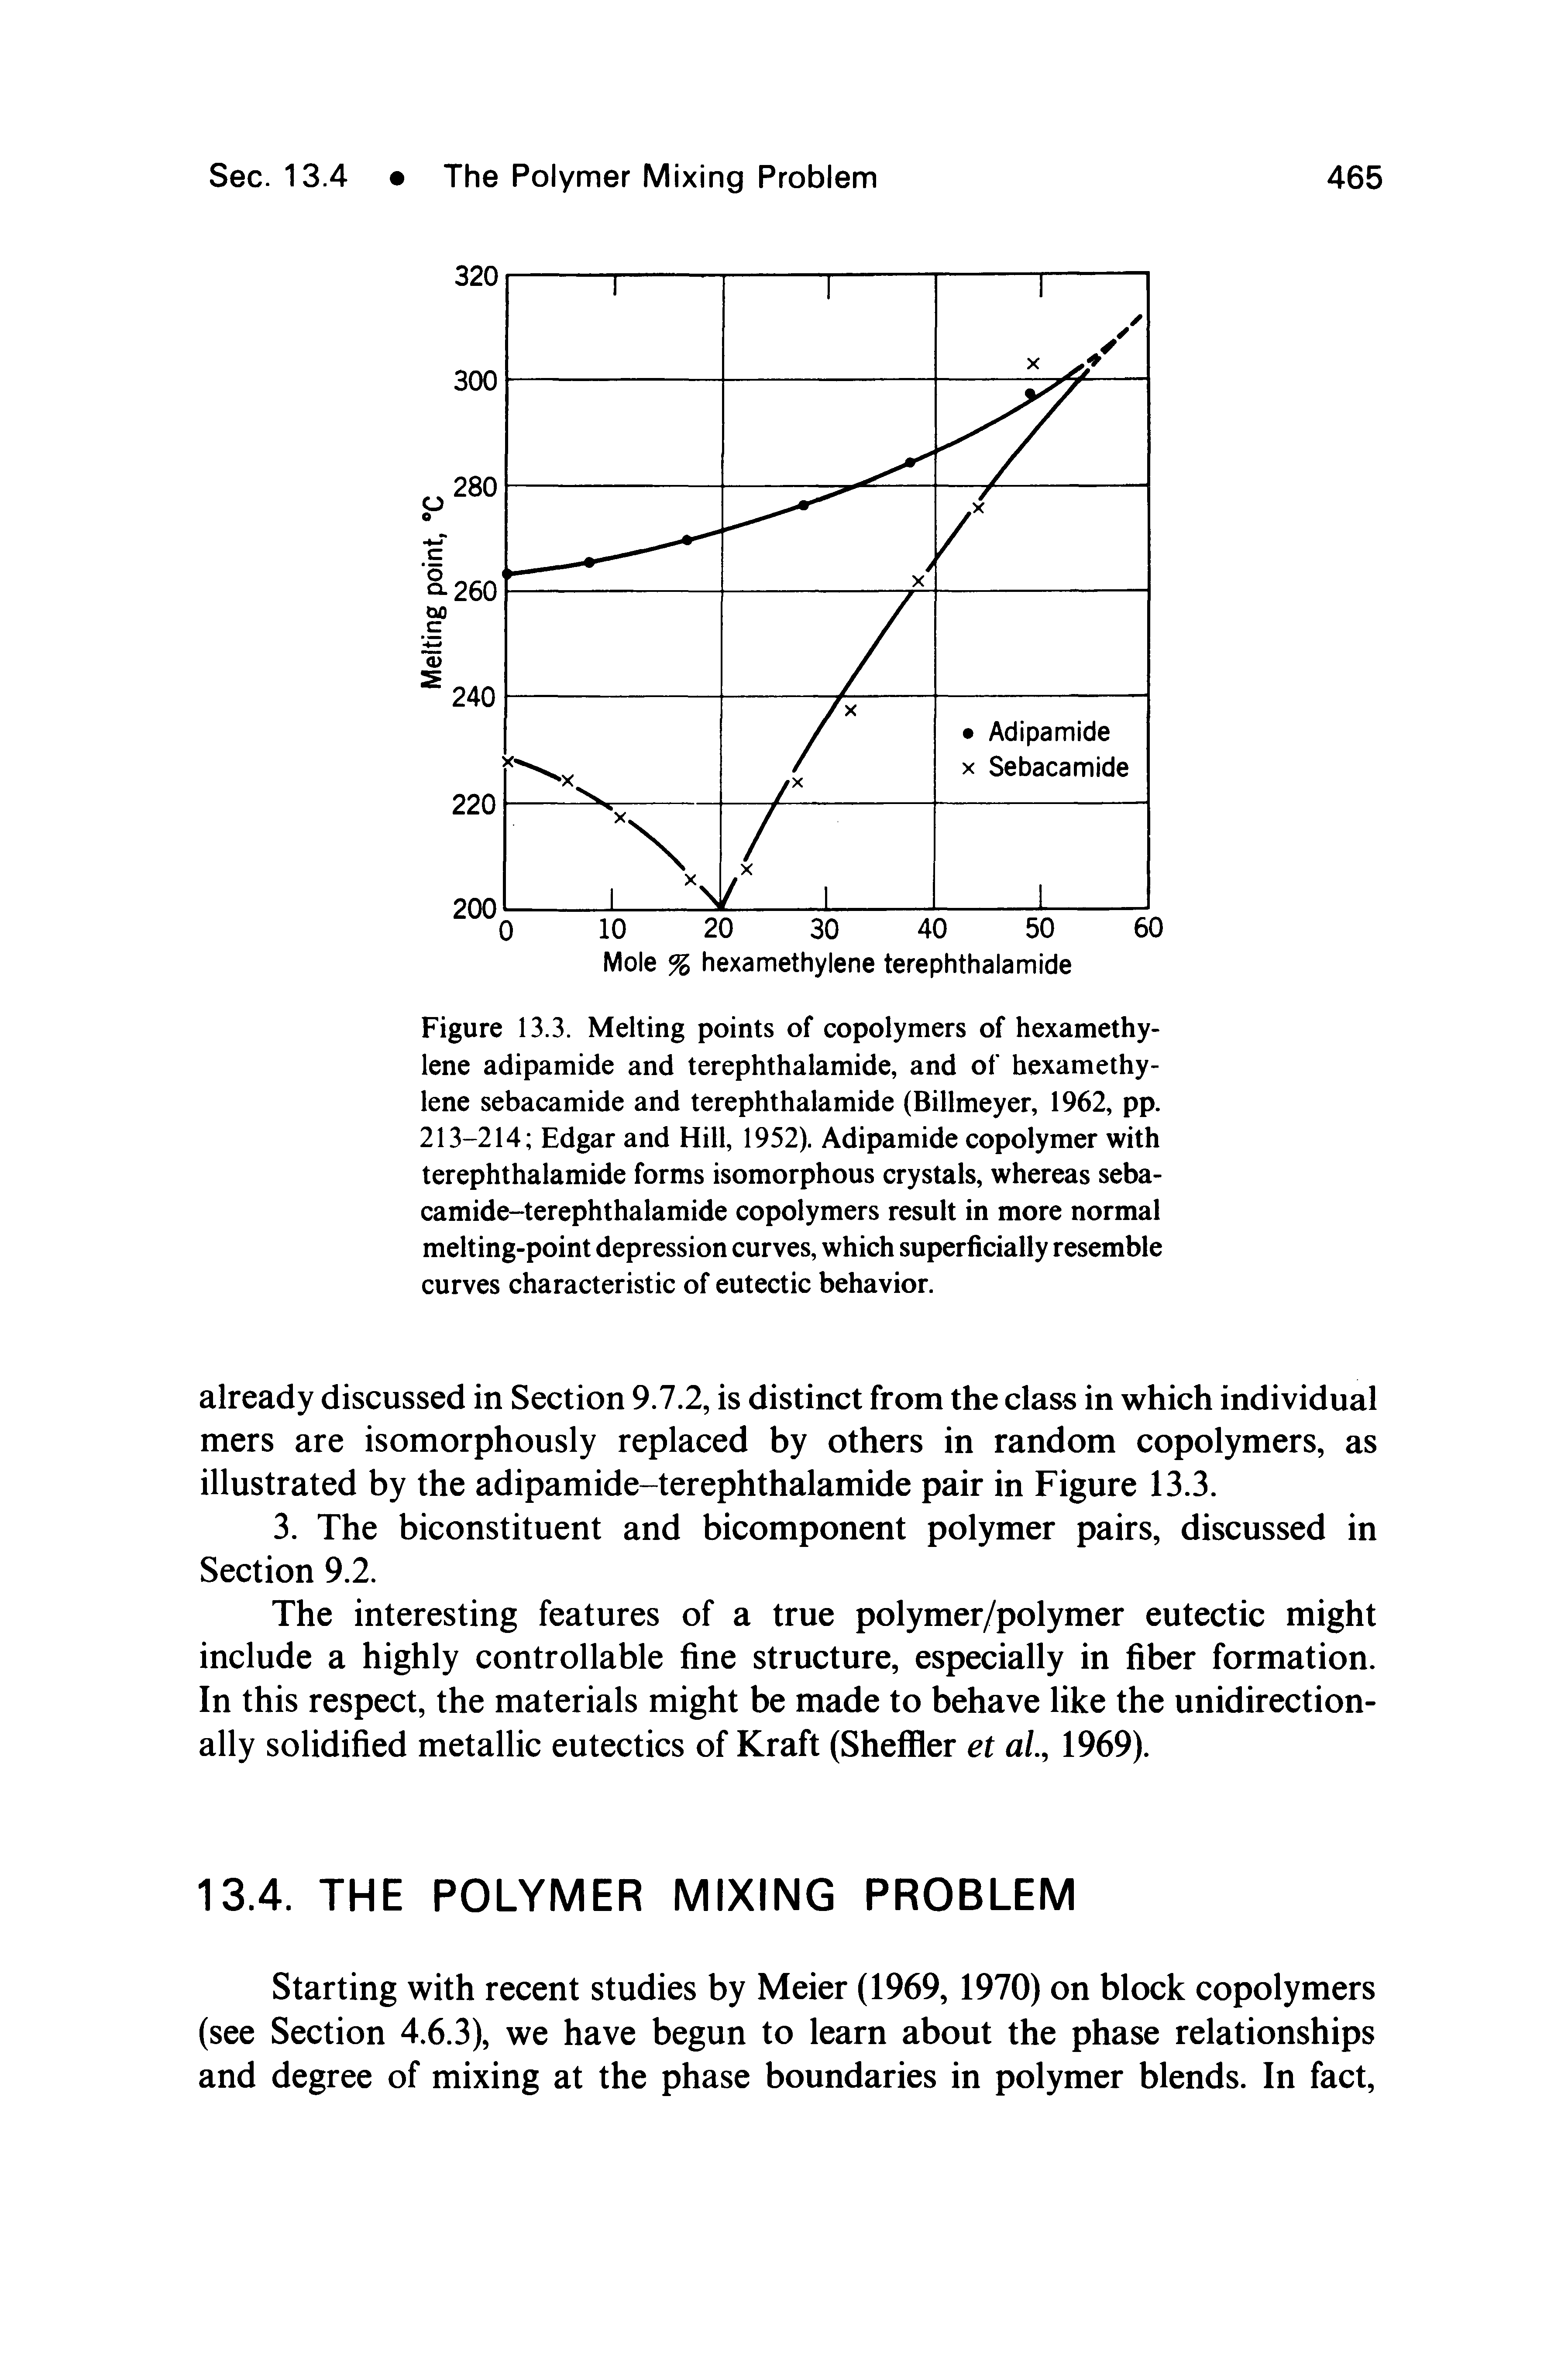 Figure 13.3. Melting points of copolymers of hexamethy-lene adipamide and terephthalamide, and of hexamethylene sebacamide and terephthalamide (Billmeyer, 1962, pp. 213-214 Edgar and Hill, 1952). Adipamide copolymer with terephthalamide forms isomorphous crystals, whereas seba-camide-terephthalamide copolymers result in more normal melting-point depression curves, which superficially resemble curves characteristic of eutectic behavior.